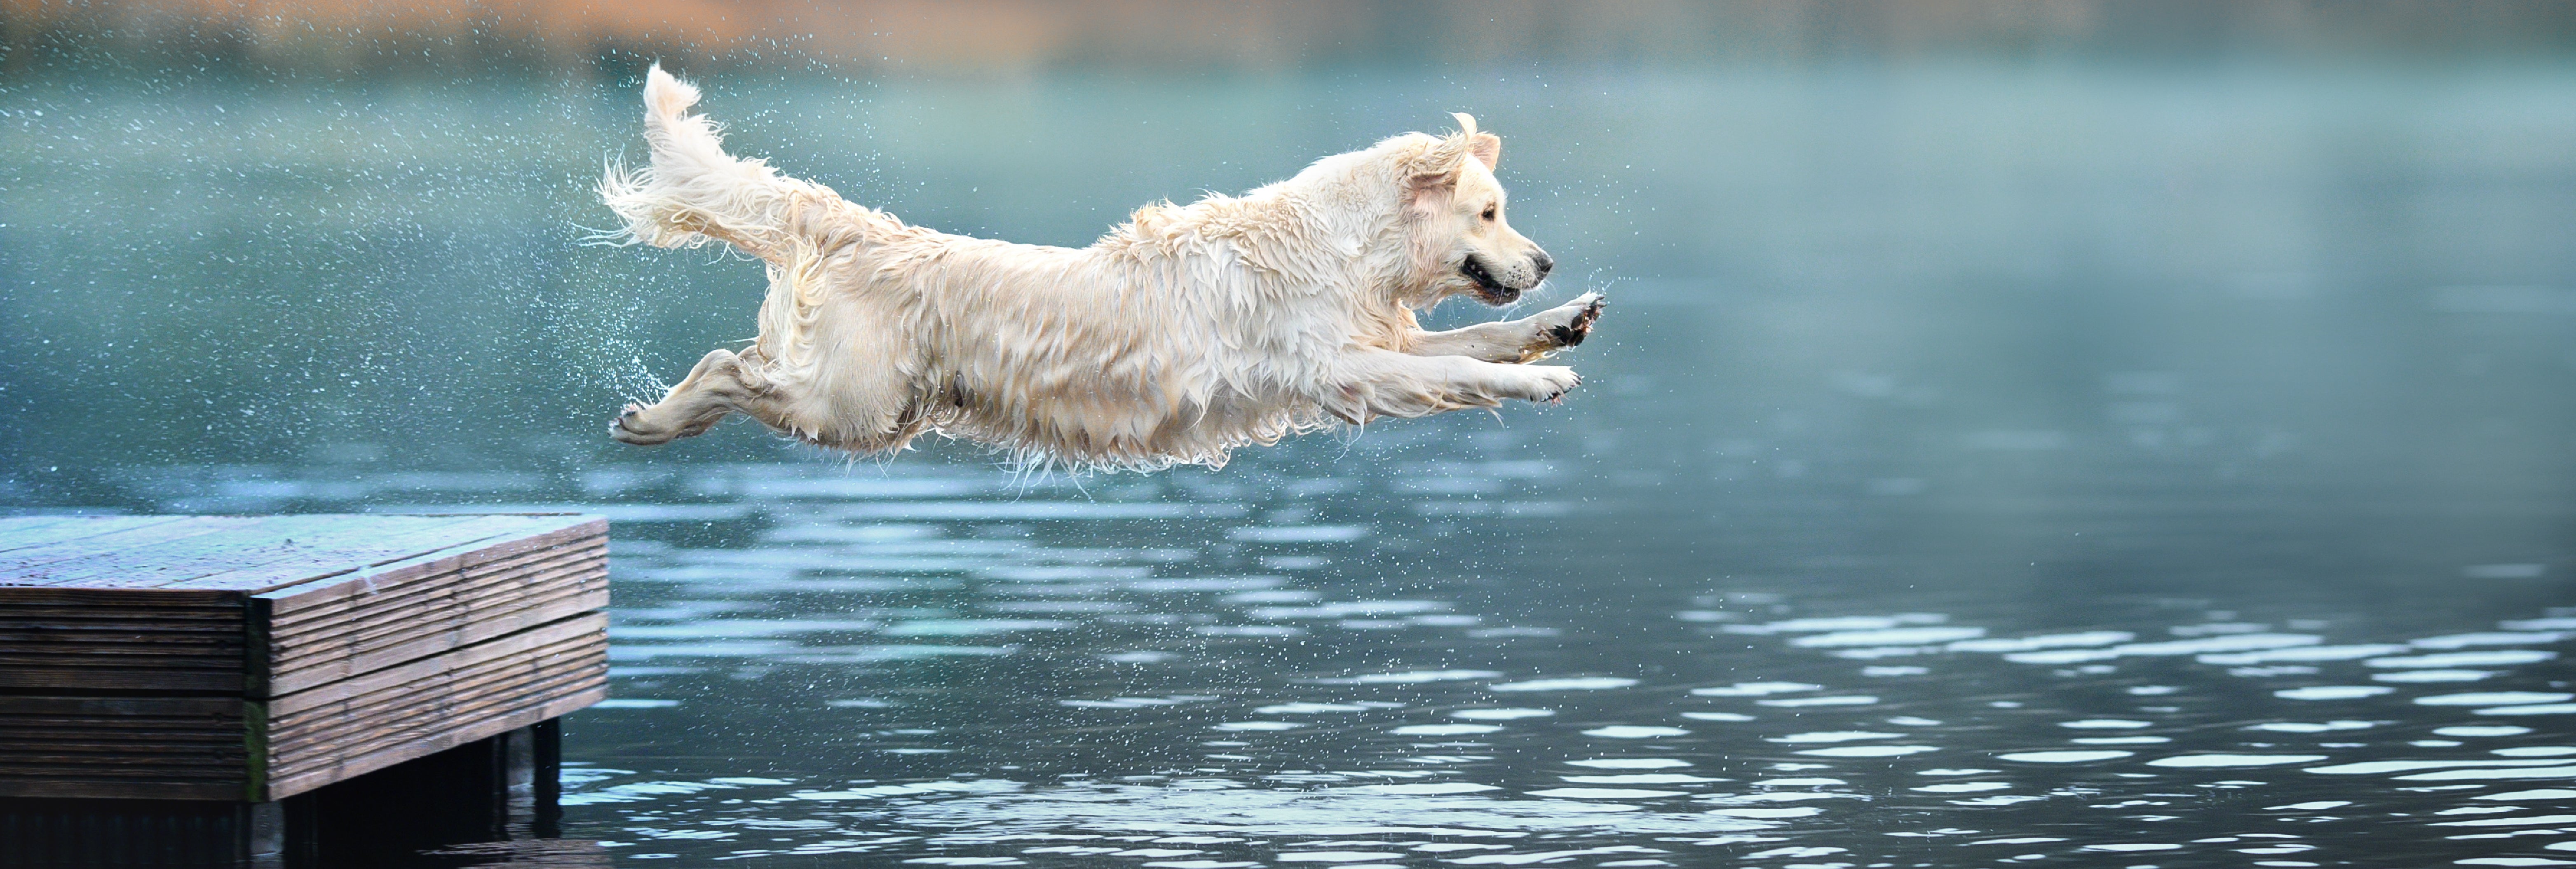 water intoxication in dogs - dog jumping